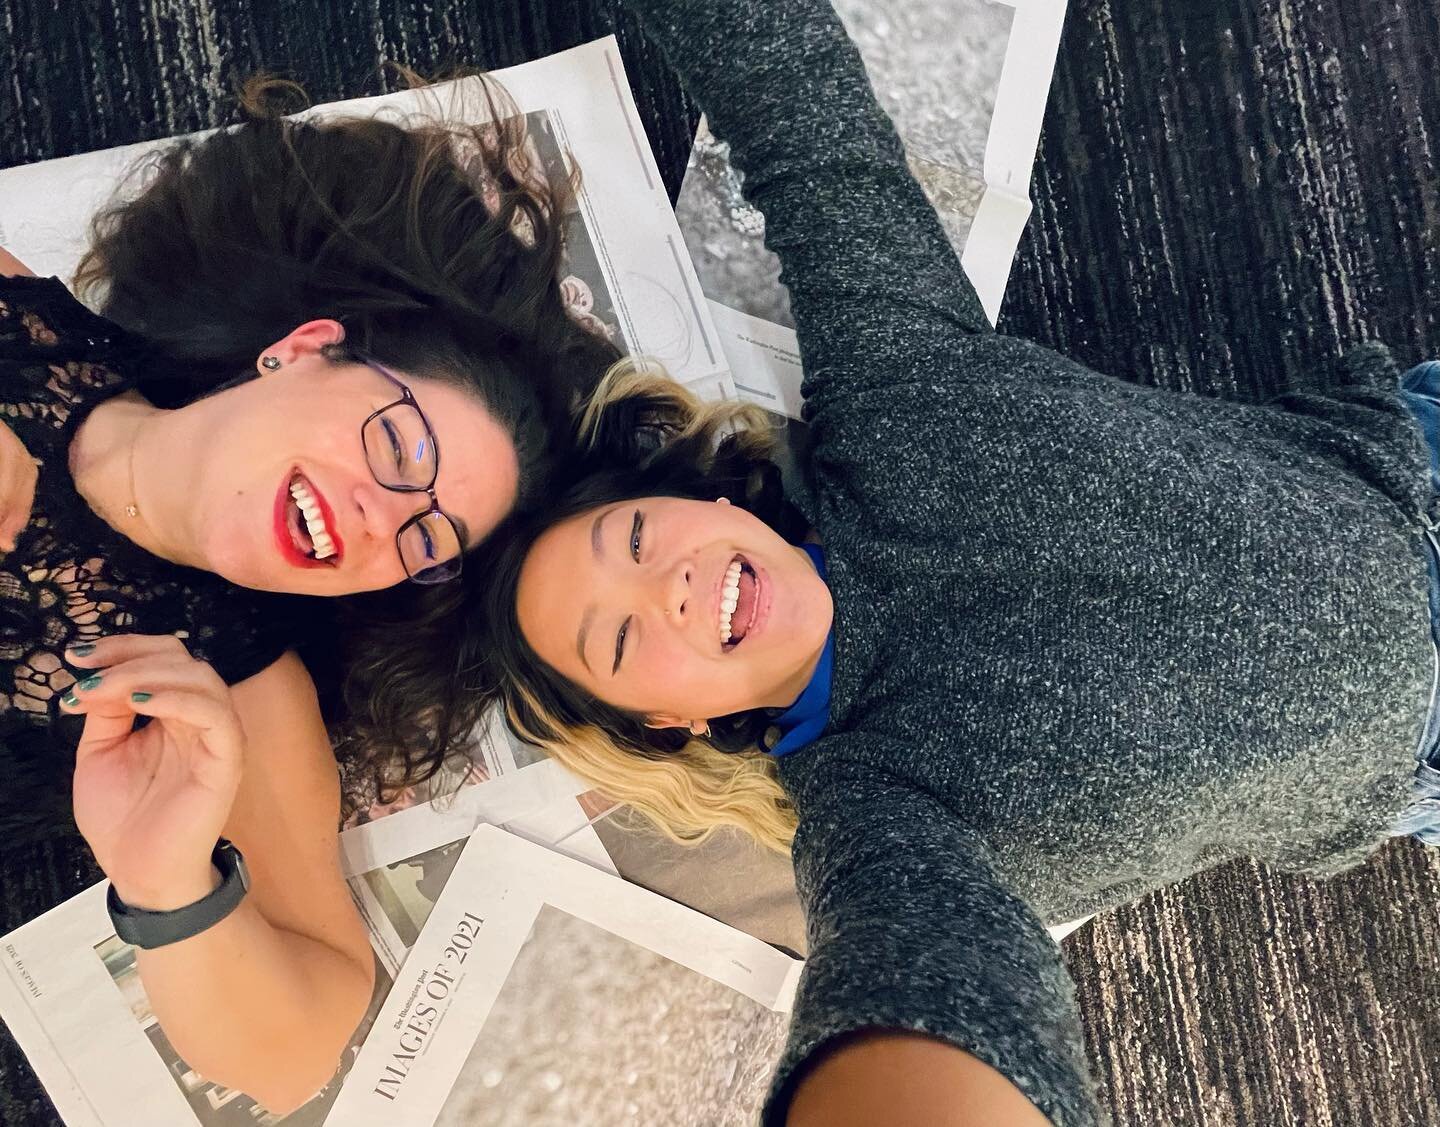 From the newsroom floor, @tmac0201 and I proudly present to you: THE LASTING IMAGES OF 2021.
&bull;
&bull;
Photo editing by @zigdeeswann, @witchert, @kdickerman, @maryannegolon and me! Be sure to take a look at the story online, where there are inter